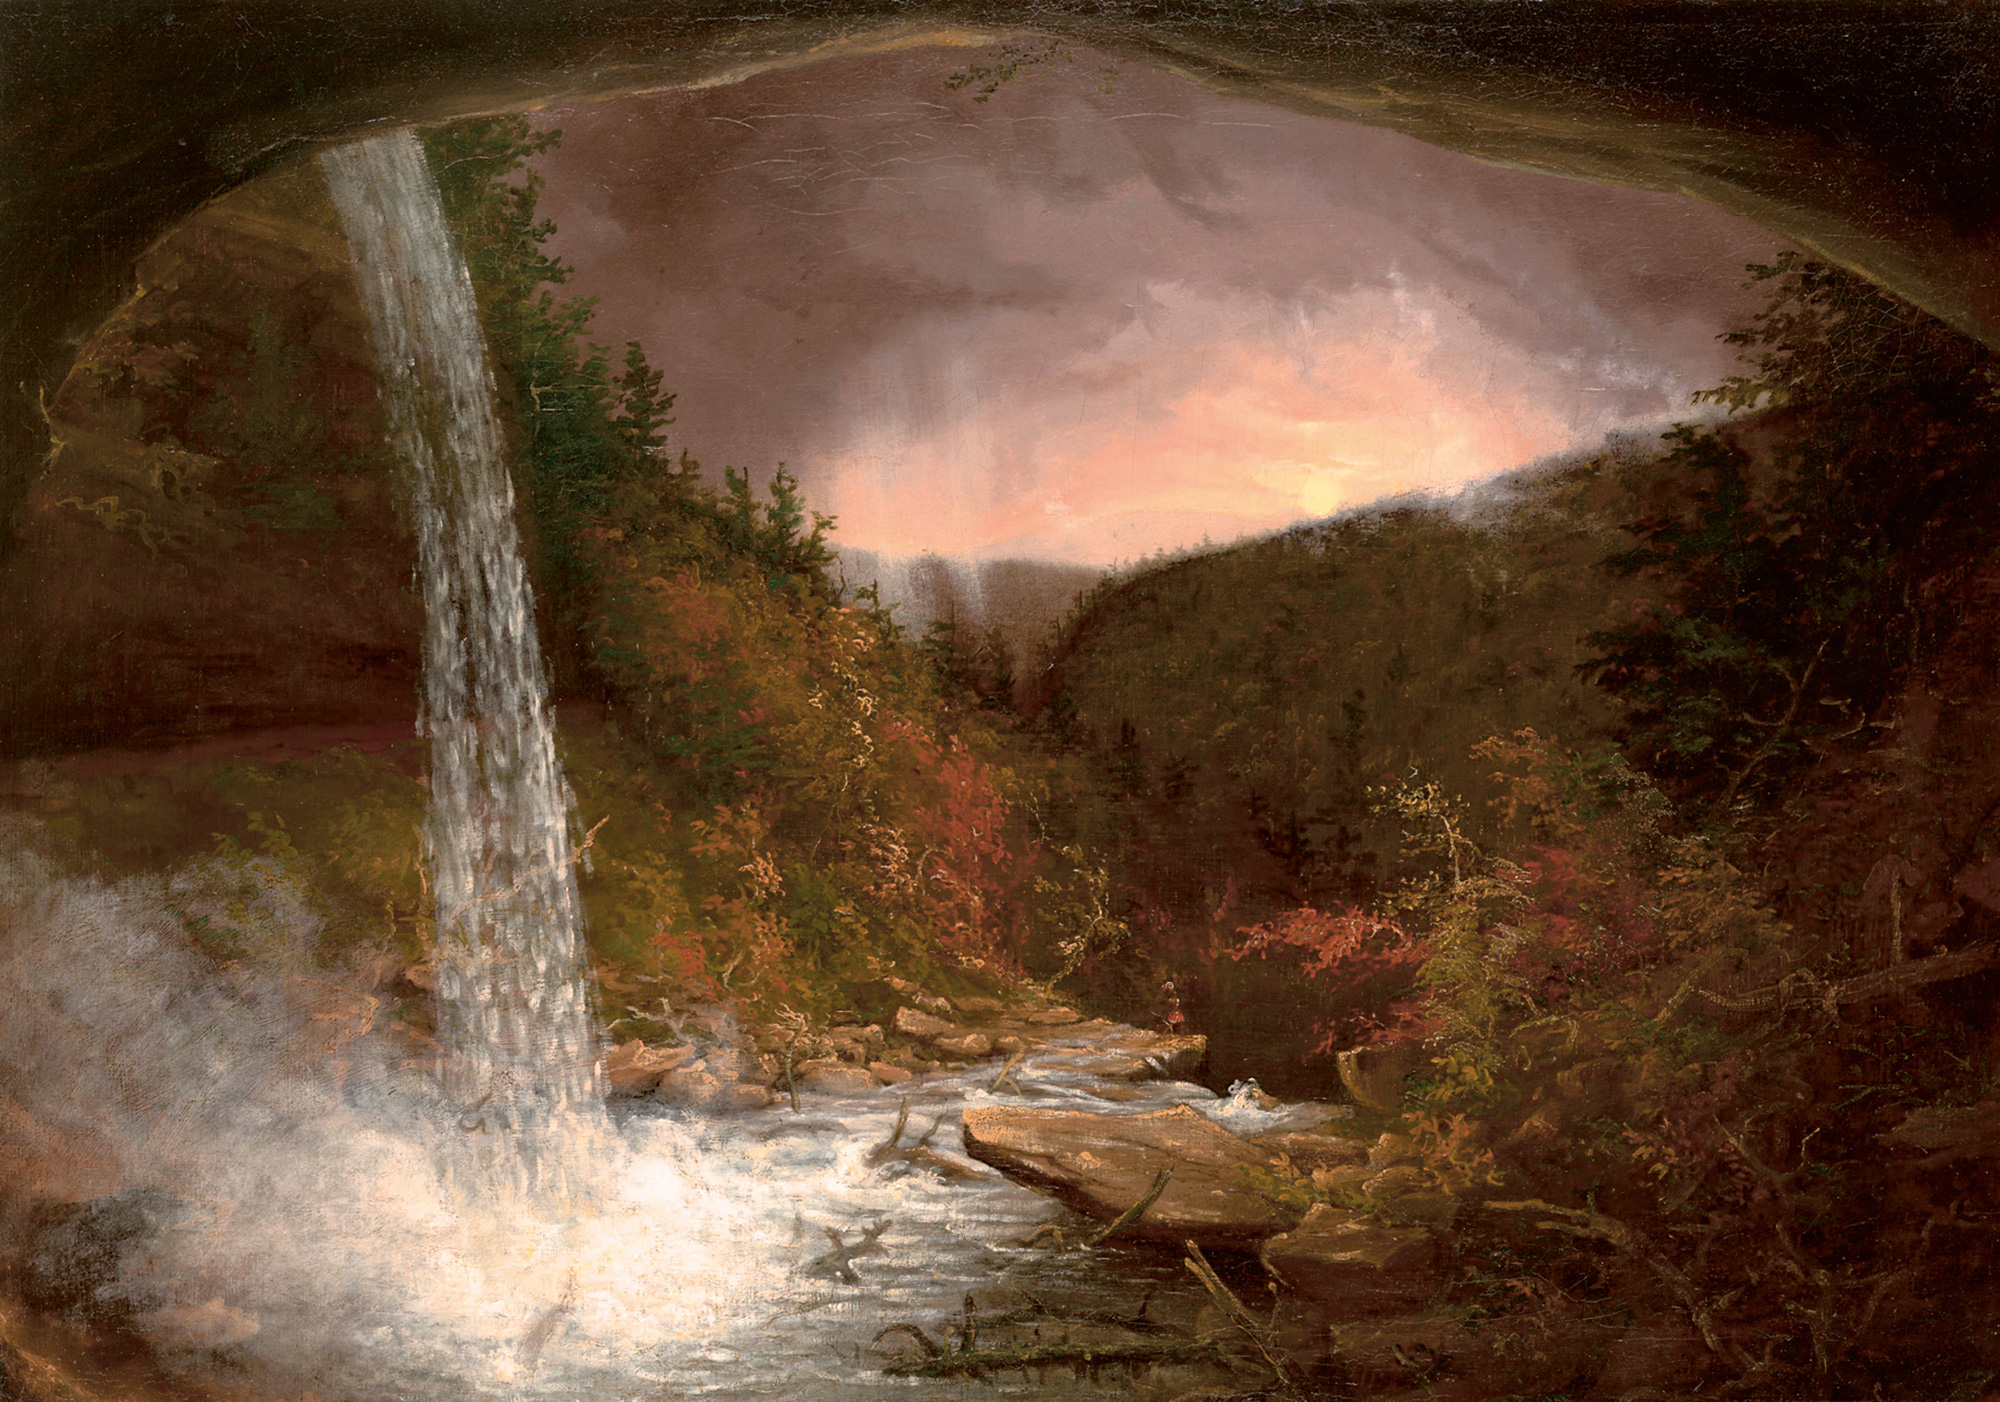 Thomas Cole, Kaaterskill Falls, 1826. This painting, a copy by the artist of a now-lost work he made during his first visit to the area in 1825, was commissioned by Daniel Wadsworth, founder of the Wadsworth Athenaeum.